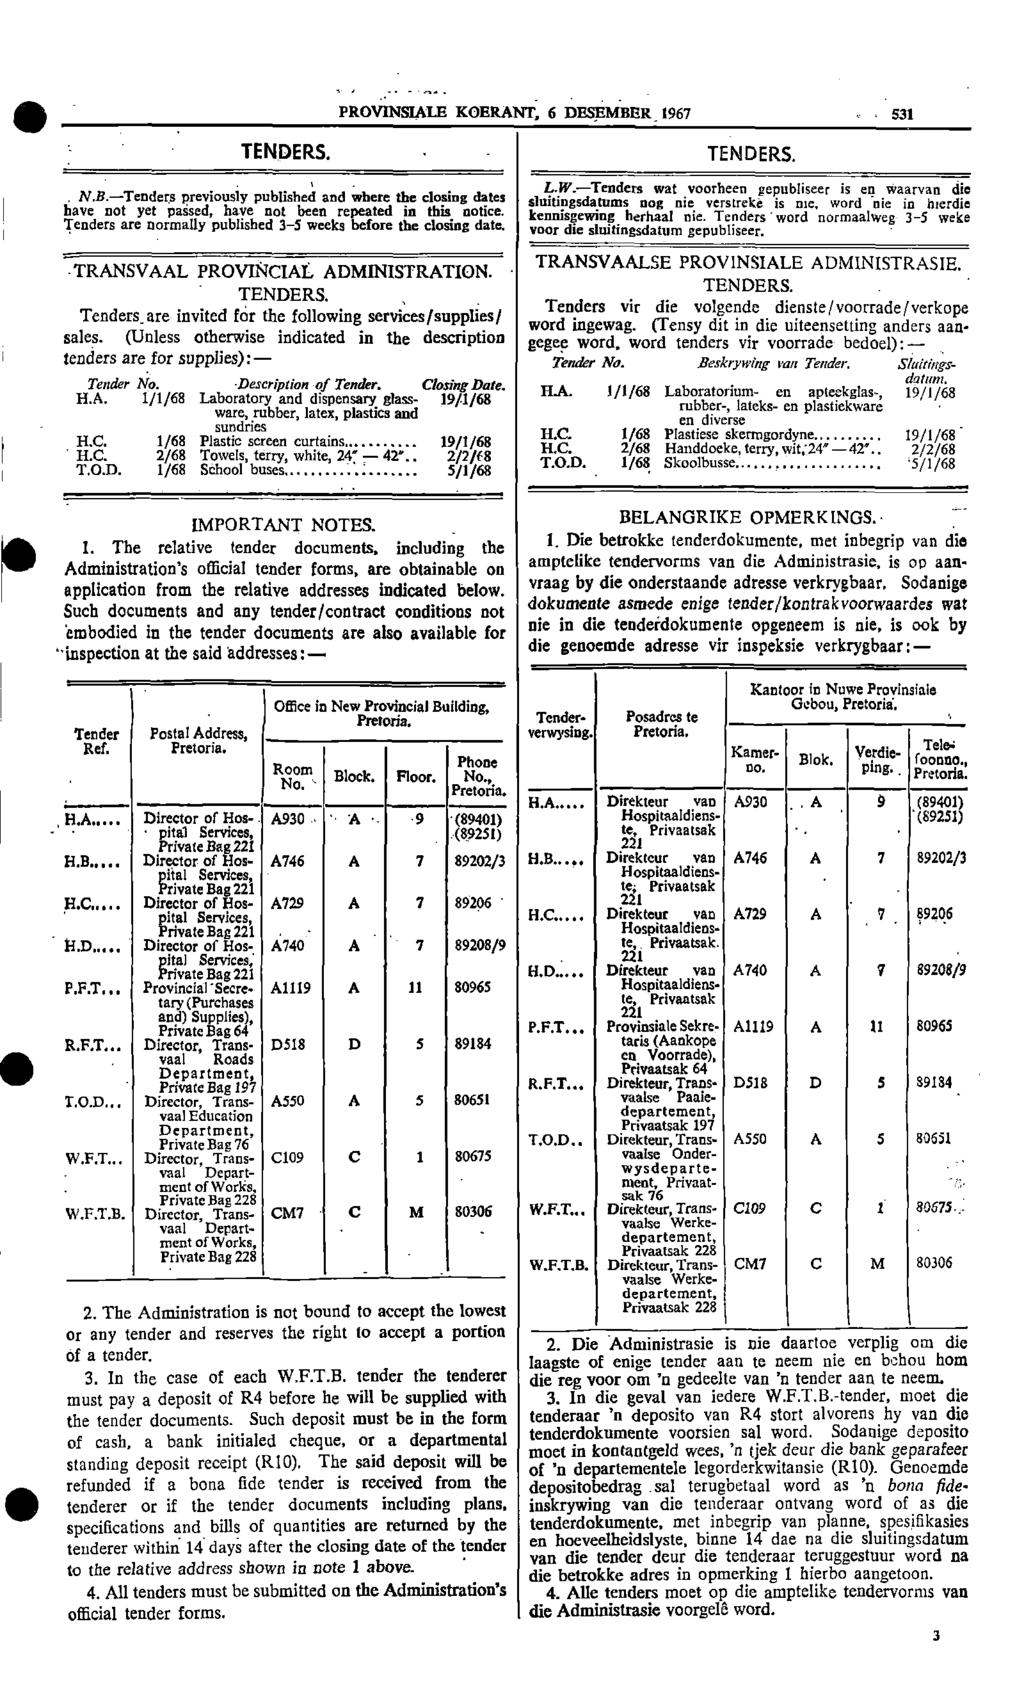 PROVNSALE KOERANT 6 DESEMBER_ 1967 531 TENDERS TENDERS NB Tenders previously published and where the closing dates have not yet passed have not been repeated in this notice Tenders are normally